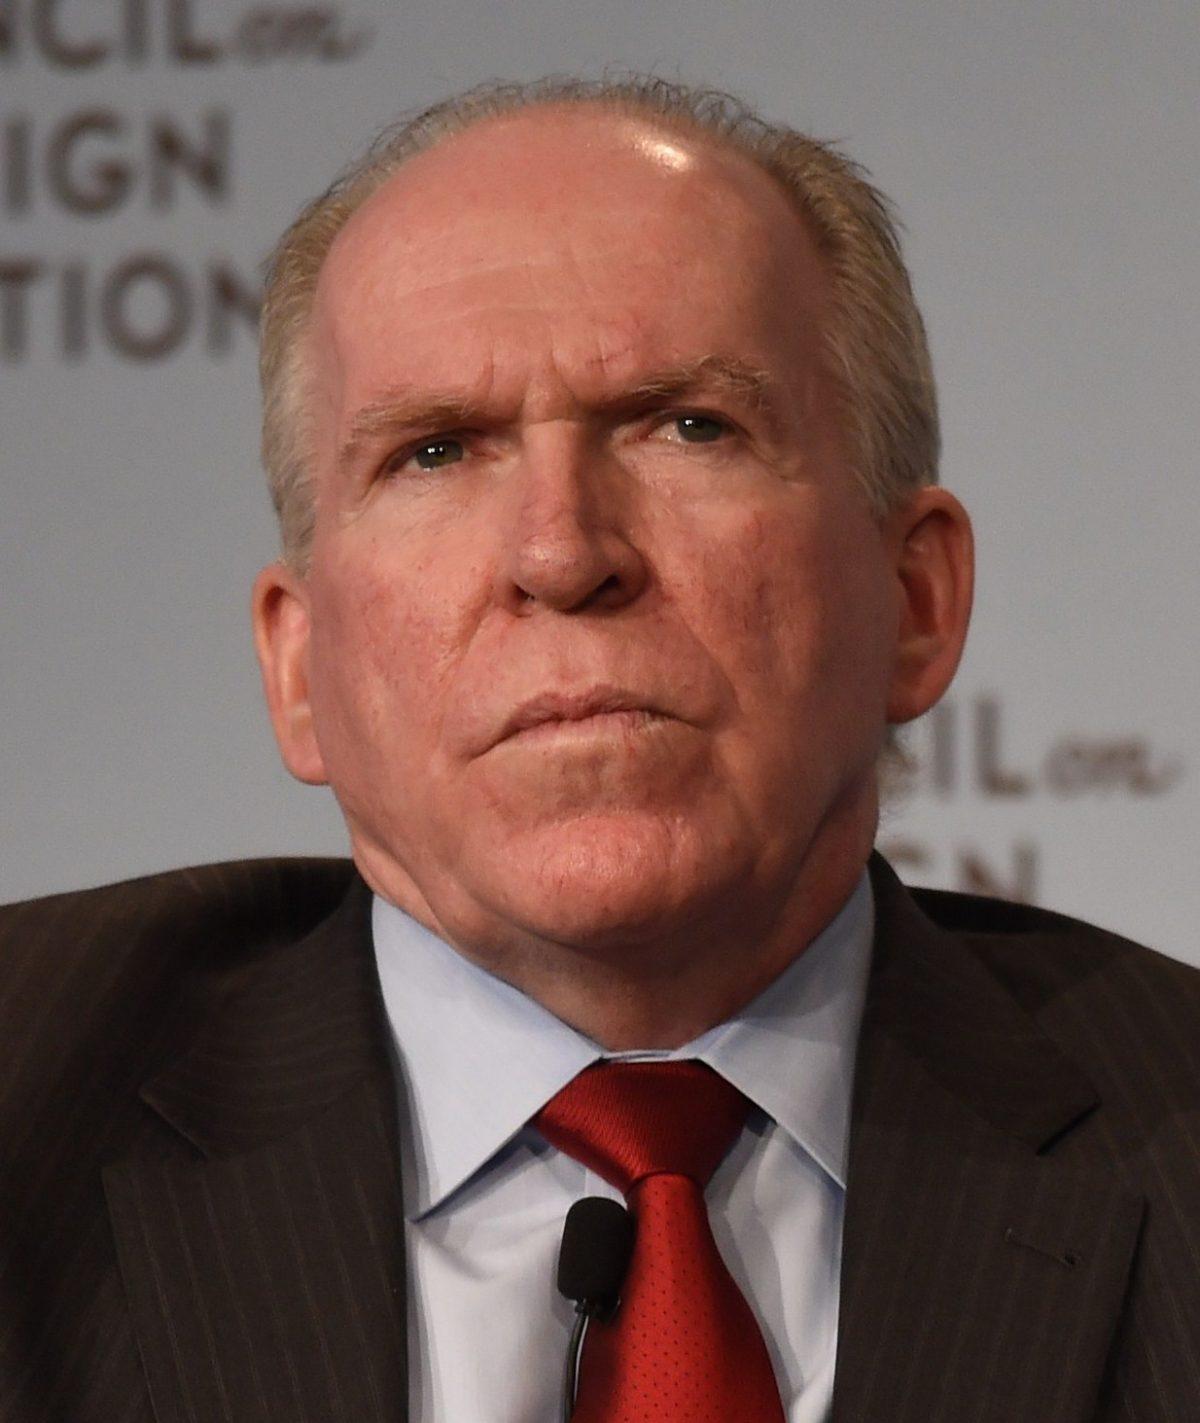 CIA Director John Brennan on March 13, 2015. Brennan played a crucial role in the creation of the Russia-collusion narrative. (Don Emmert/AFP/Getty Images)